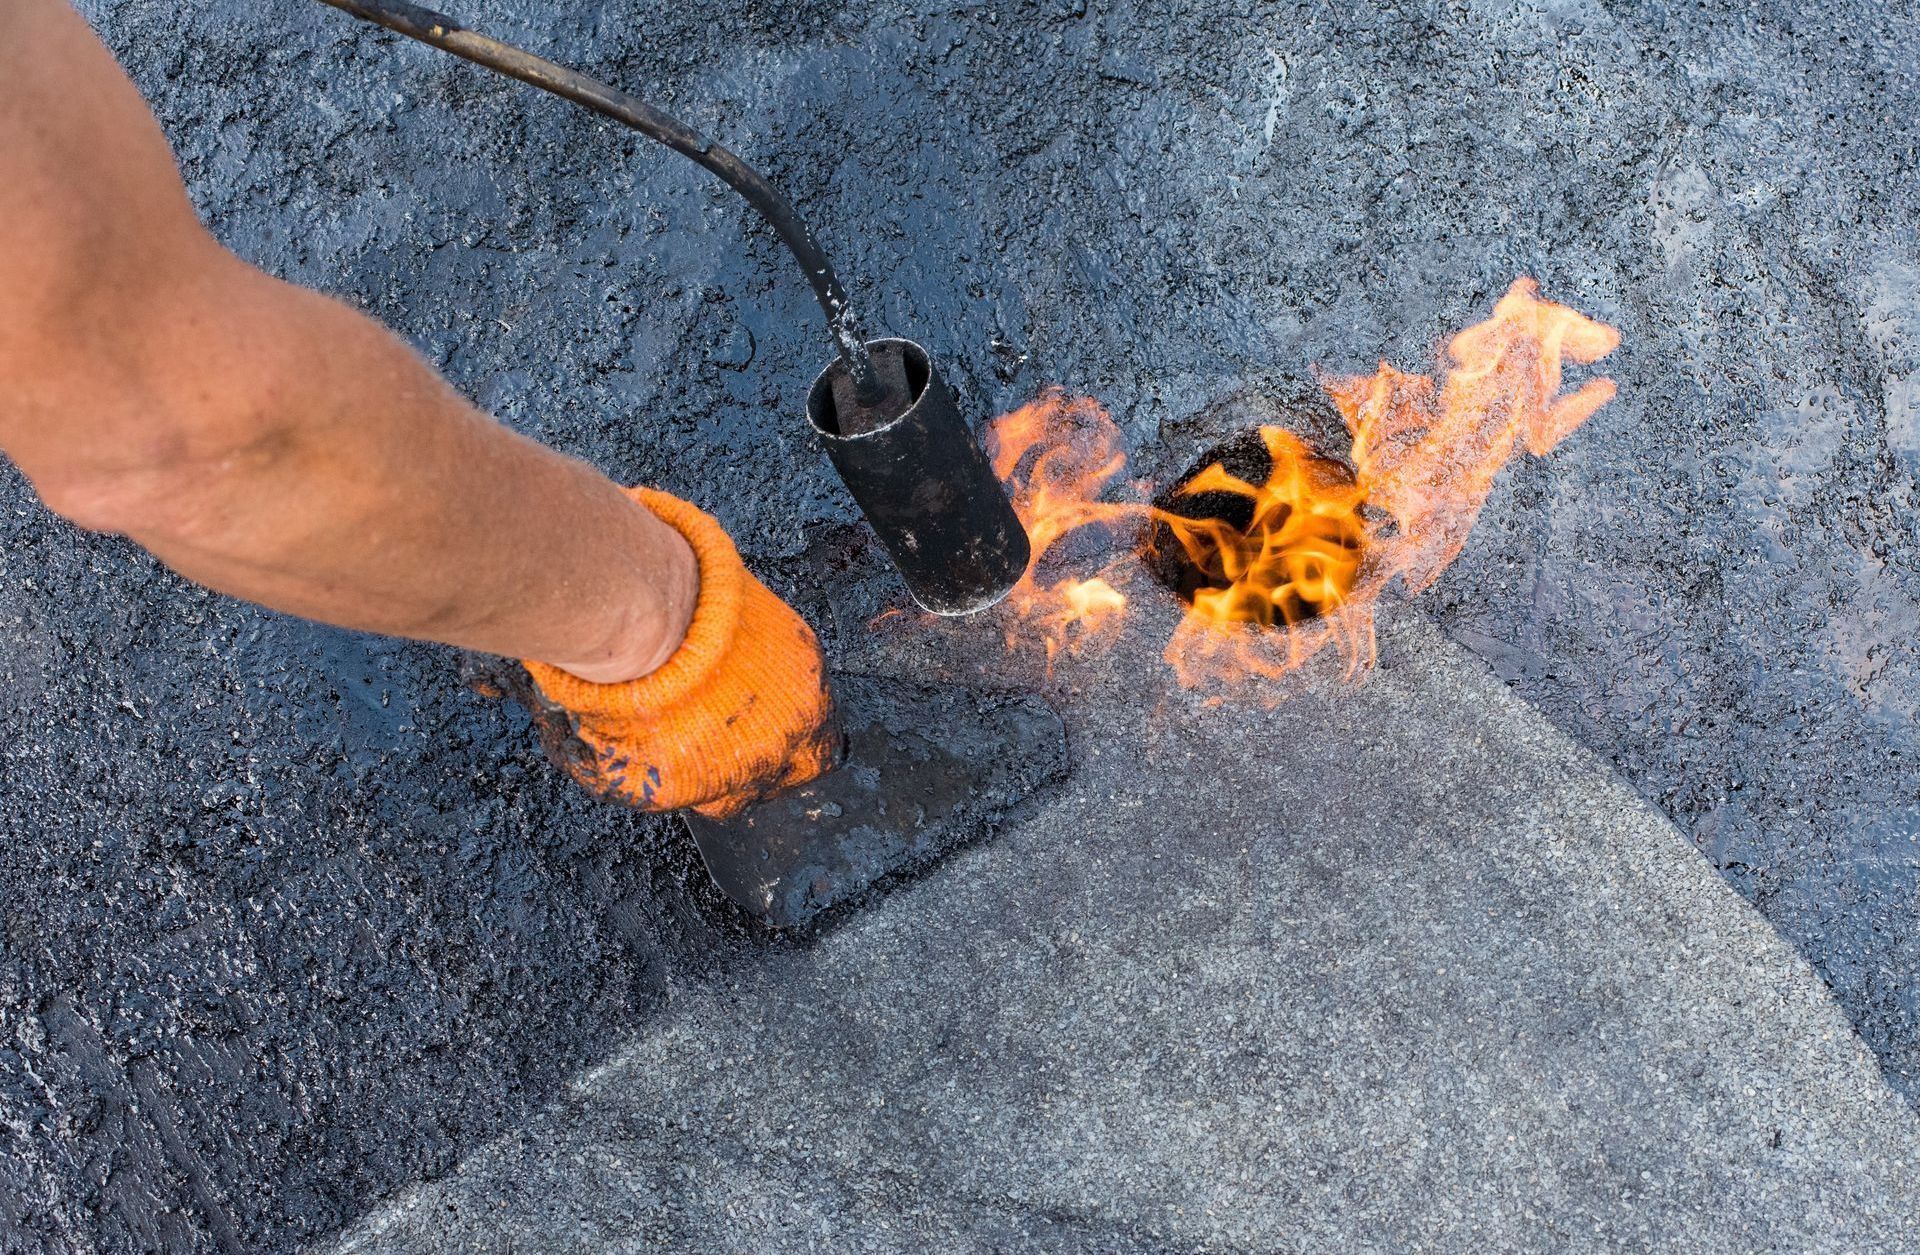 A person is using a torch to heat a piece of asphalt.